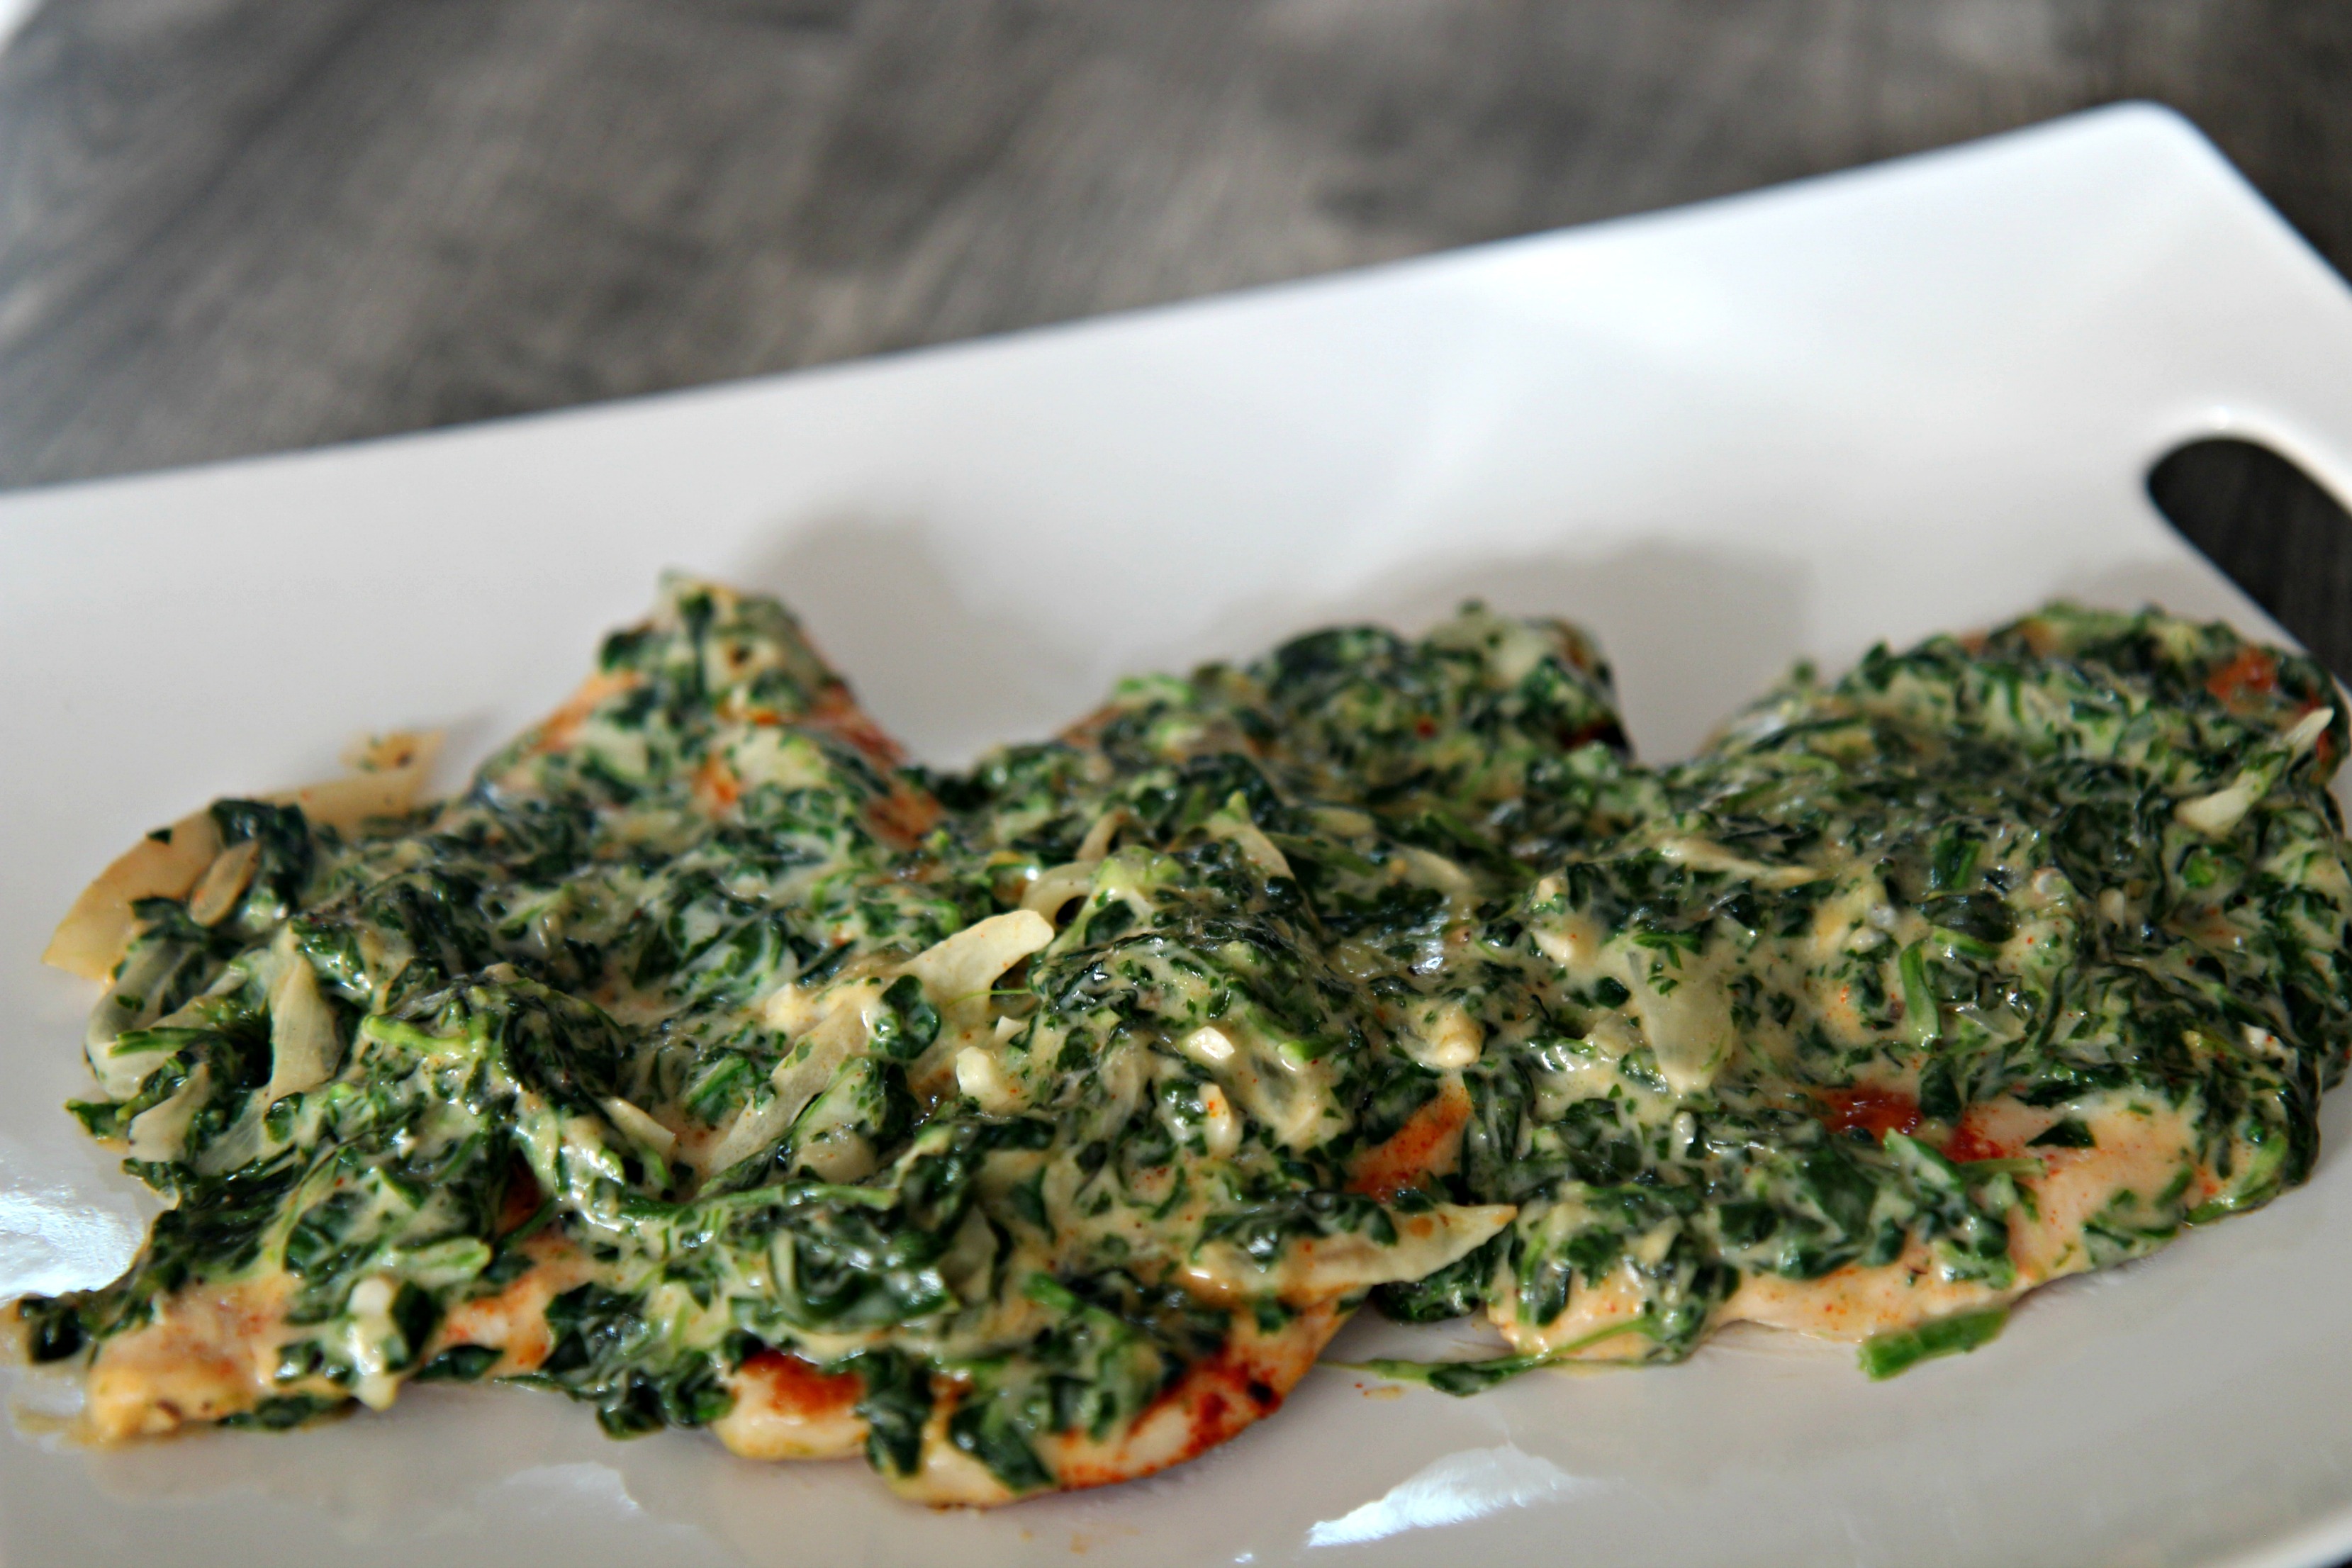 Tender and juicy chicken topped with delicious creamed spinach